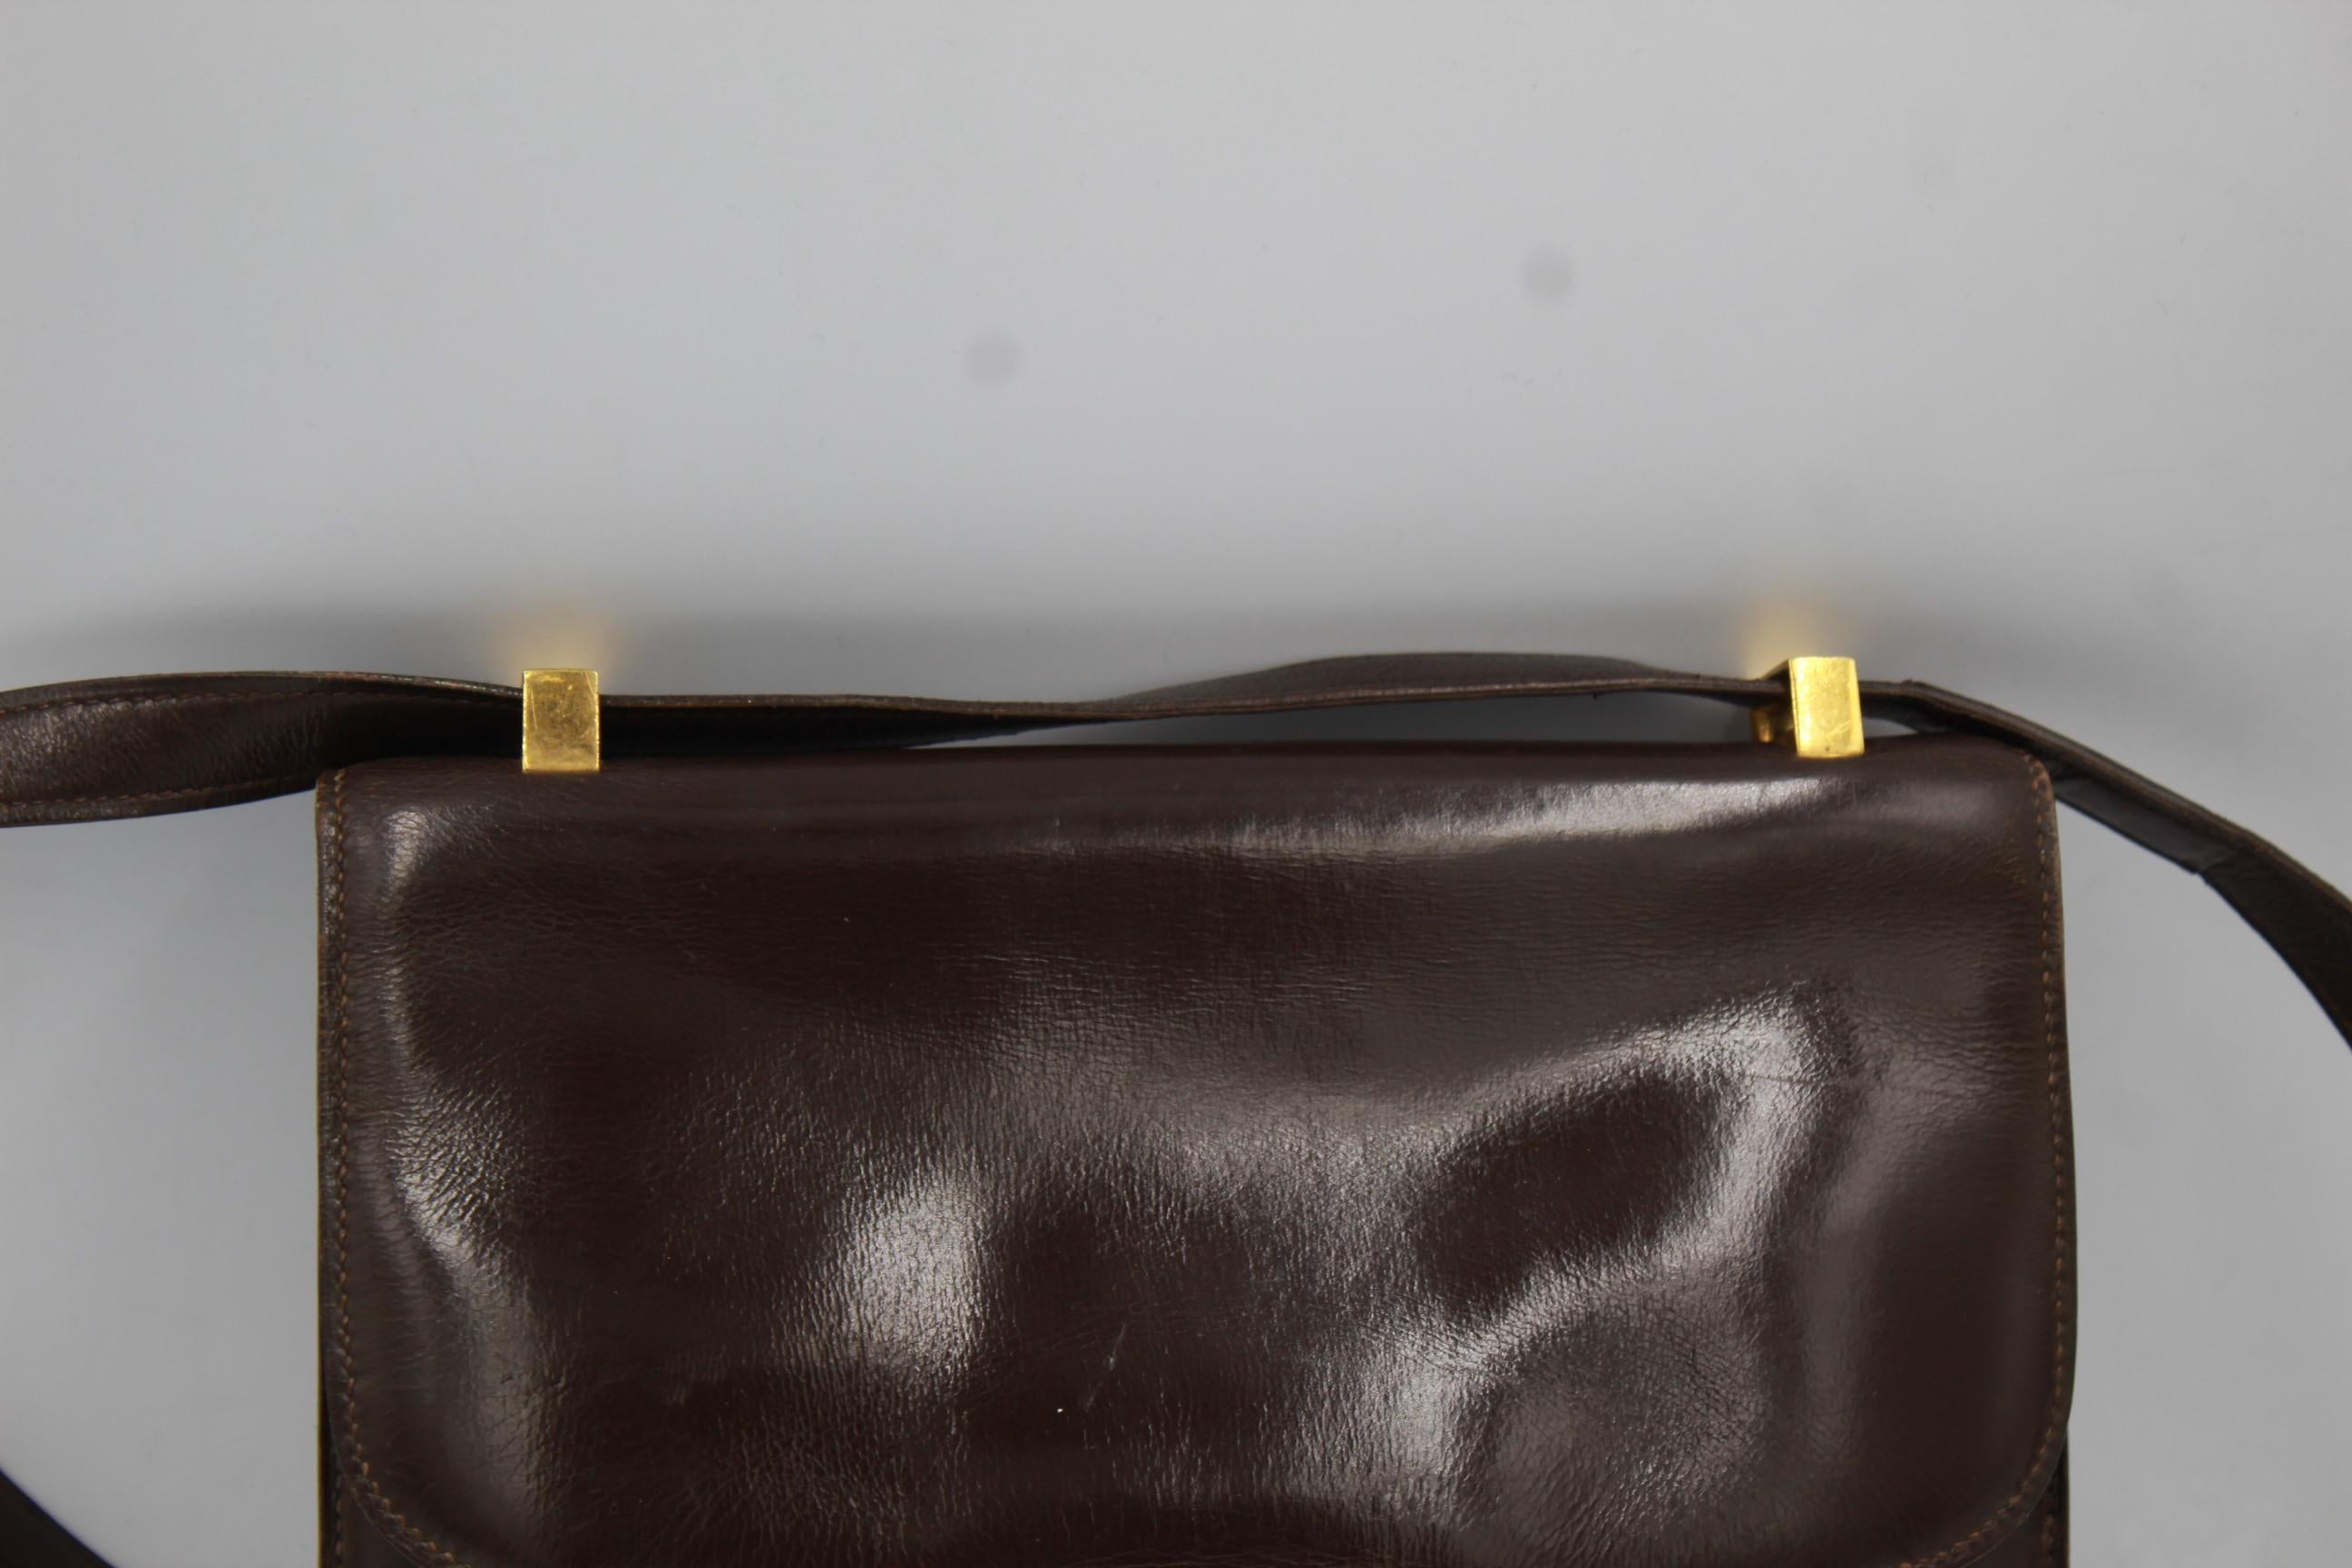 Nice vintage Hermes Constance bag in brown box leather.

Vintage bag in good vintage coondition for a bag of almost 50 years. Some signs of wear in the hardware ( scratches) and signs of wear in the leather
Size 23 cm